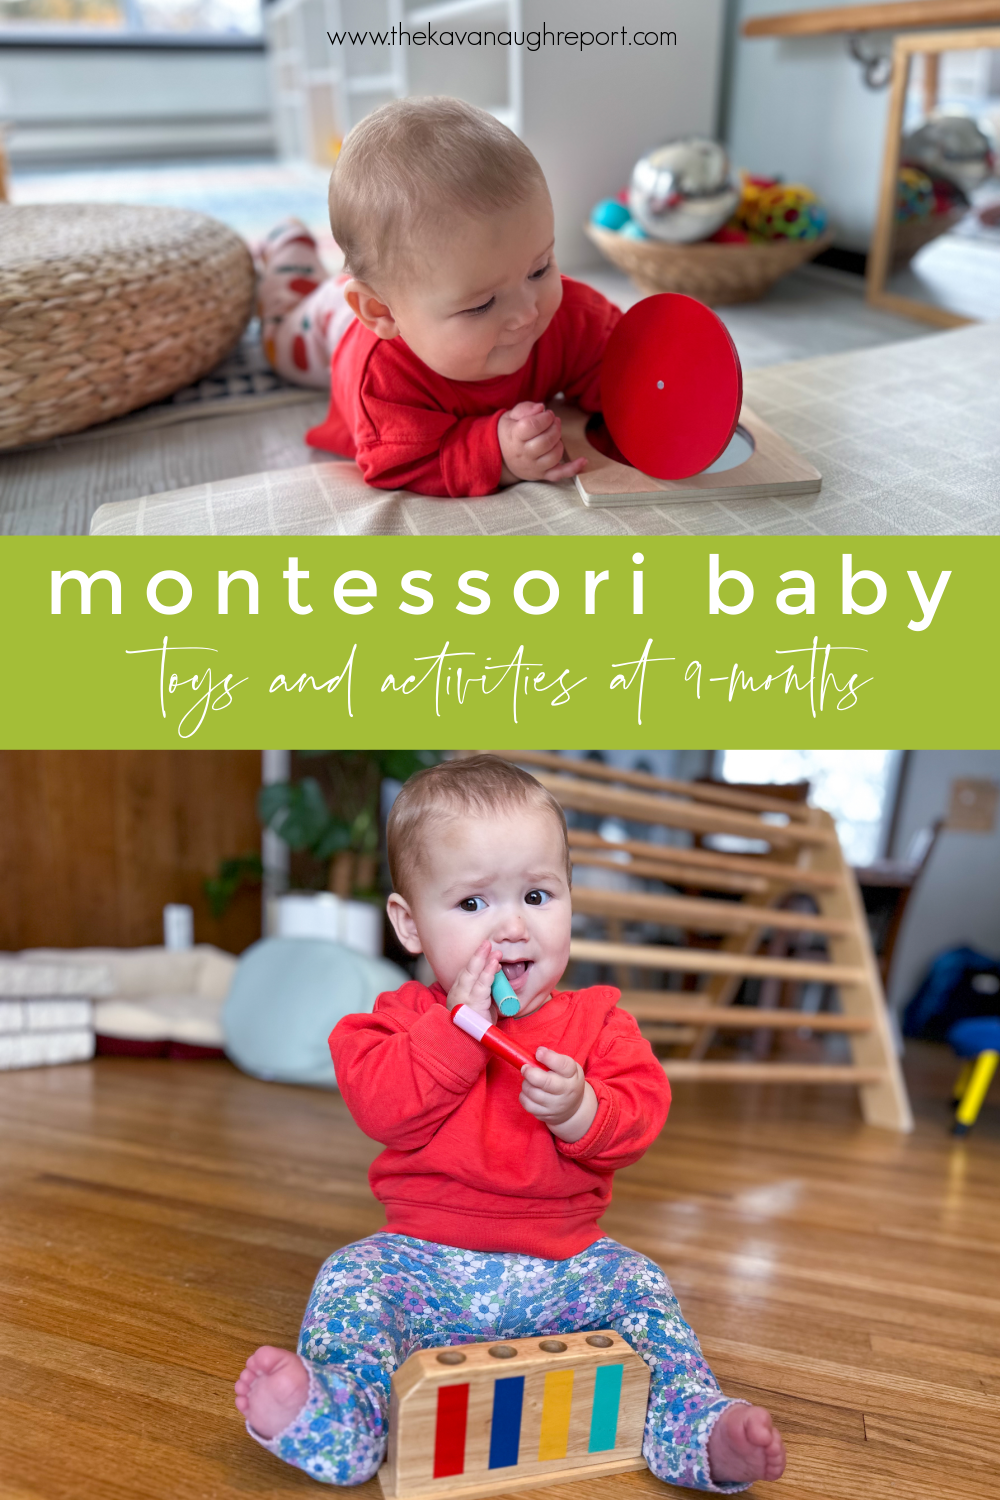 Montessori baby toys and activities to support learning at 9-months-old including fine motor, social emotional and sensory play! Easy and fun ideas.